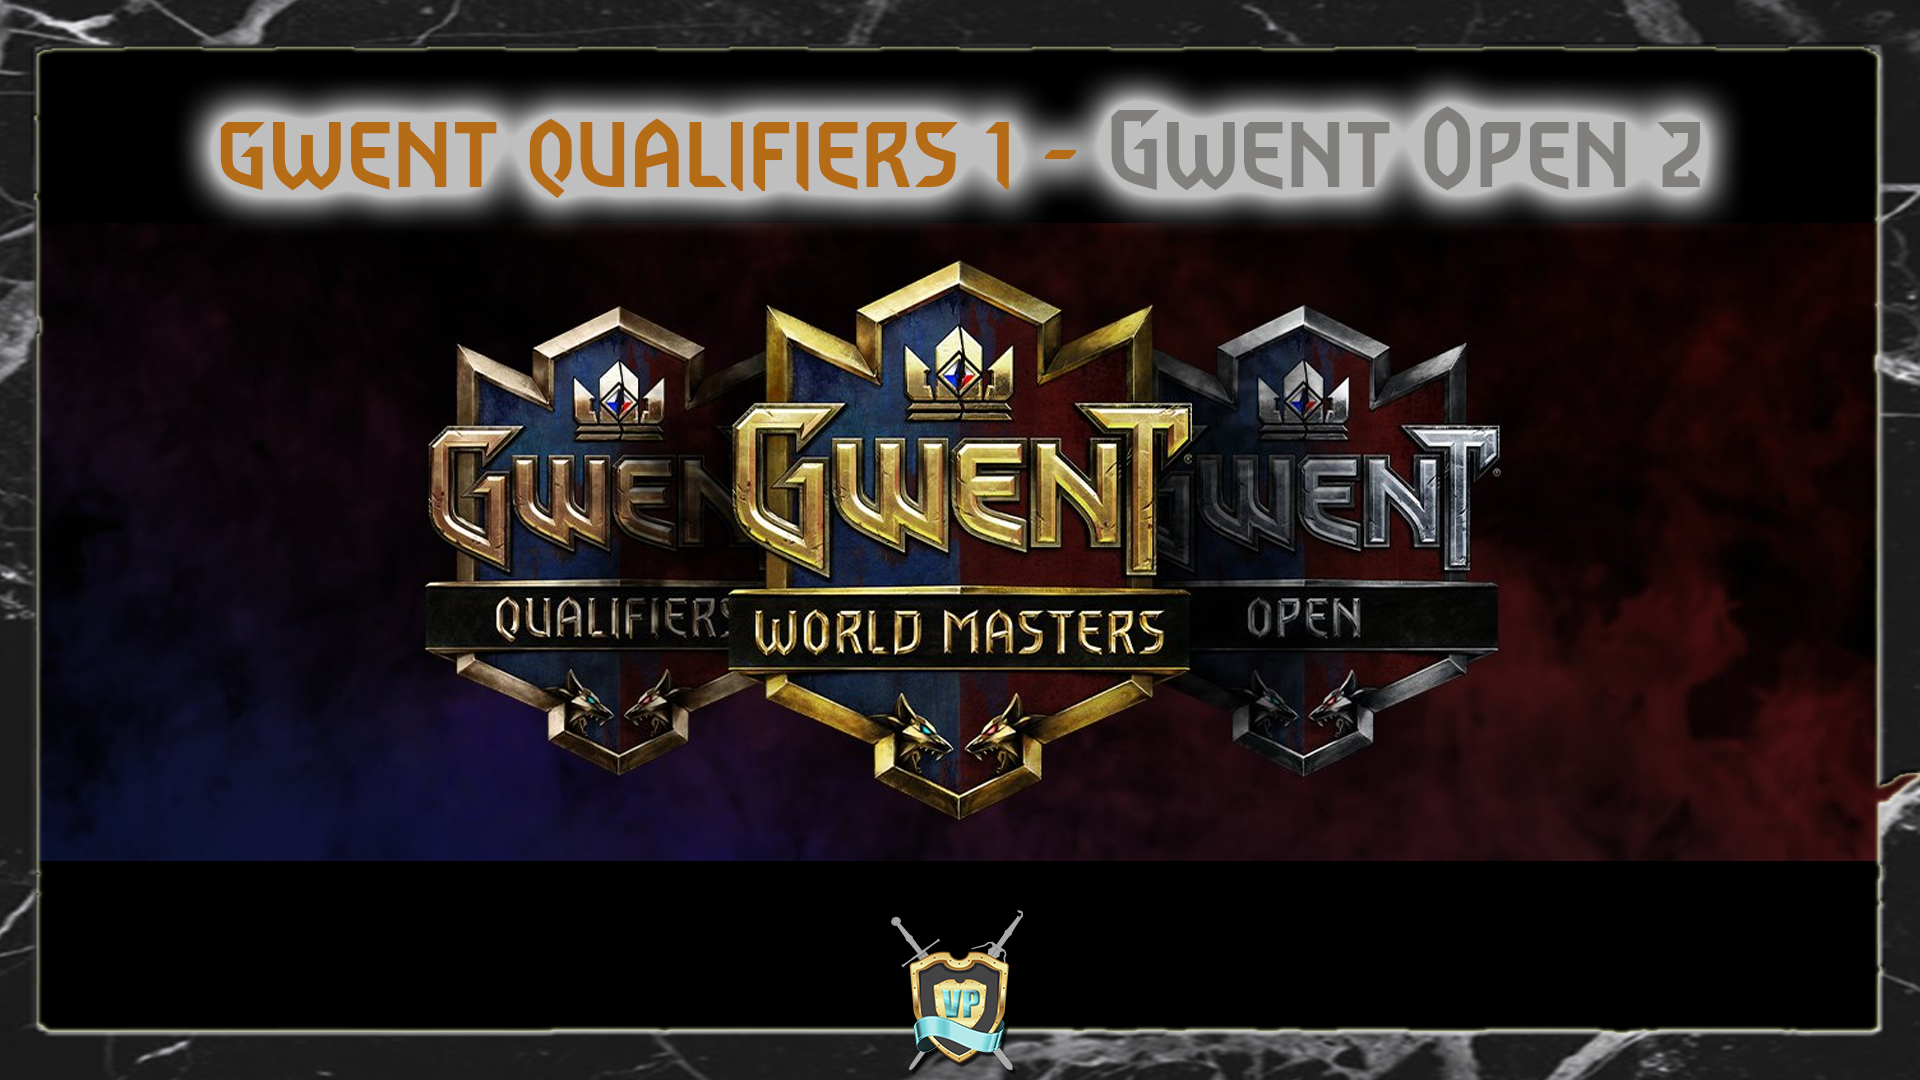 Gwent Open